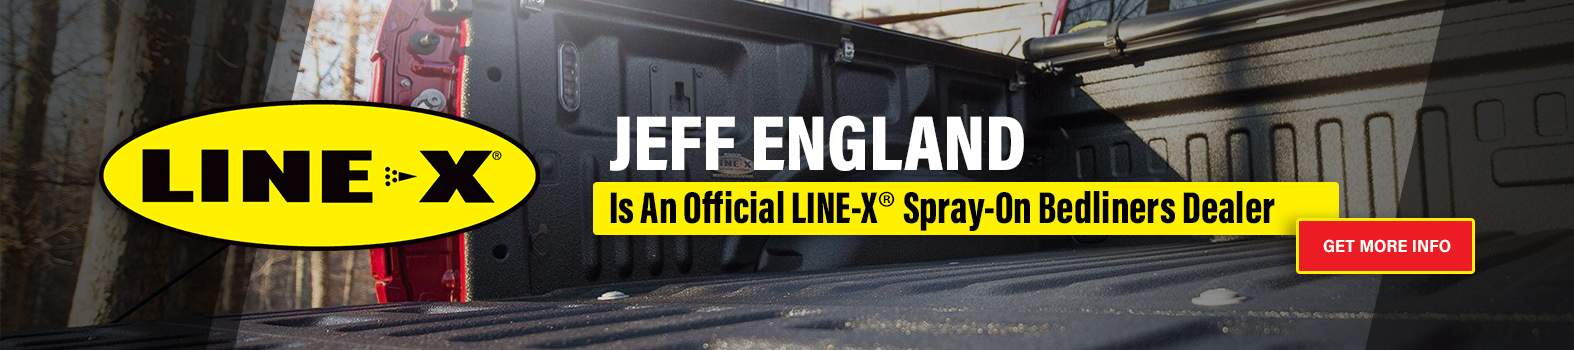 Jeff England is an Official Line-X Spray-On Bedliners Dealer - Click to Get More Info.